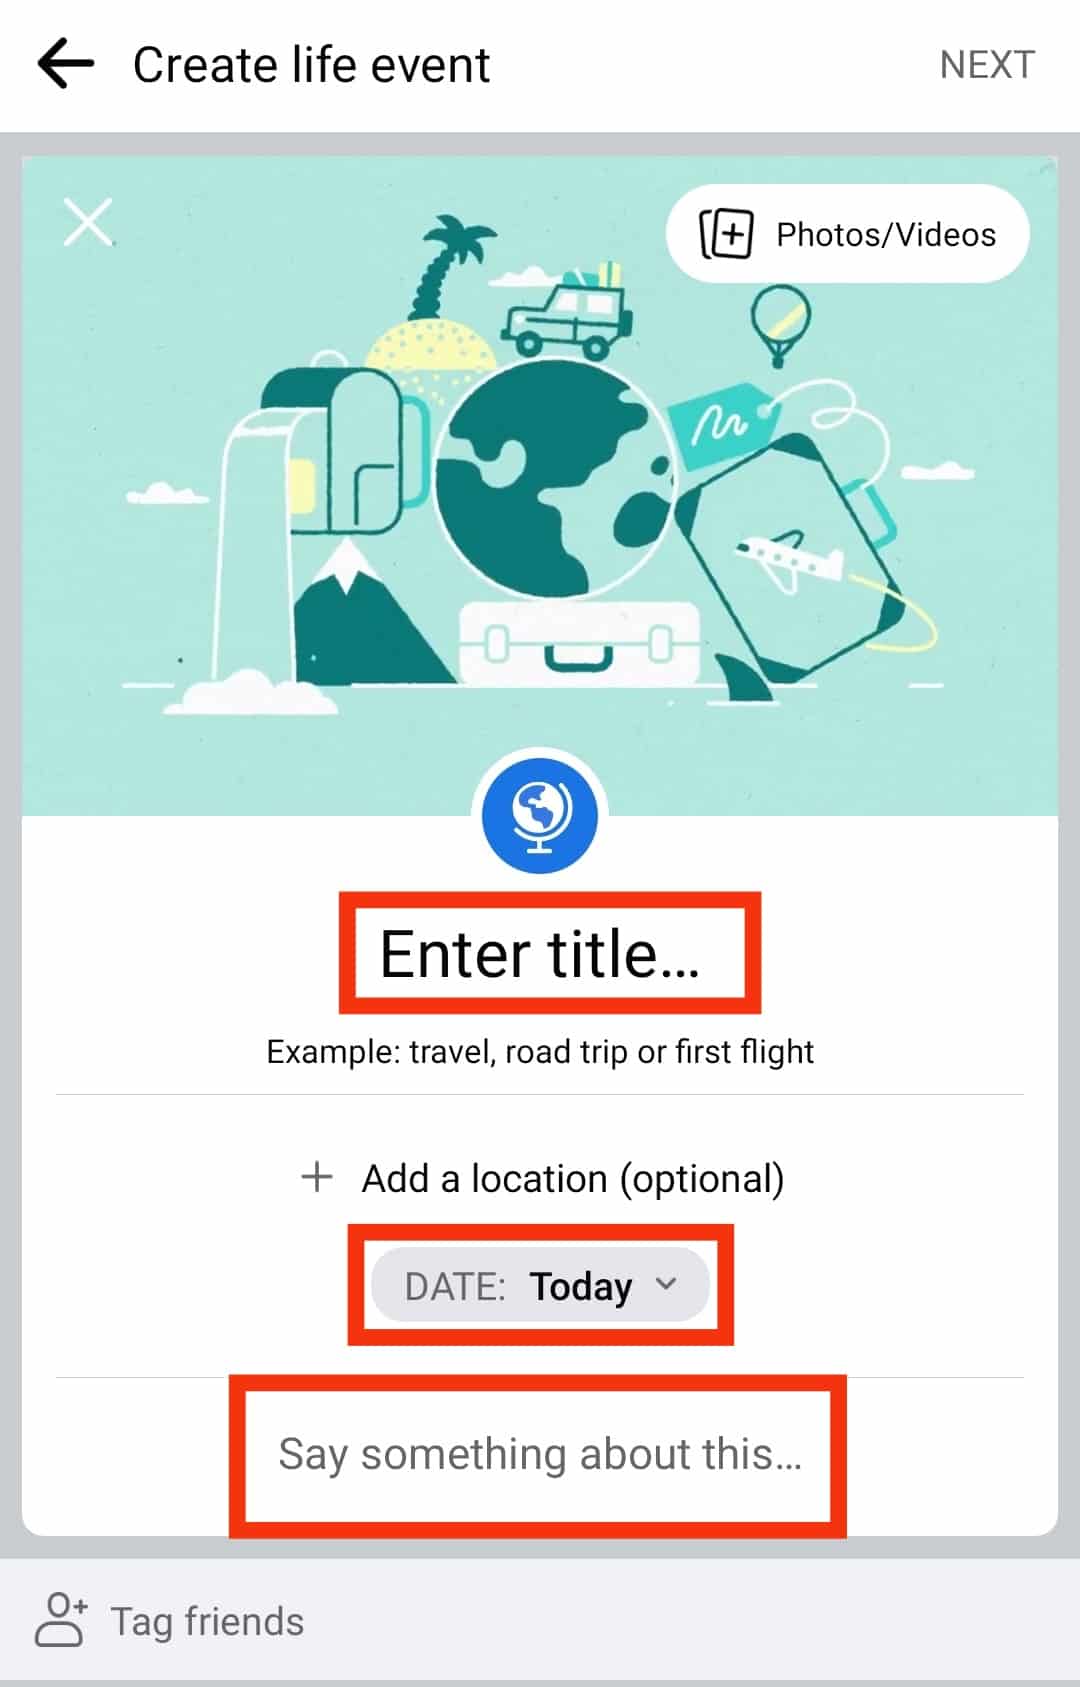 Enter A Title, Date And Other Details